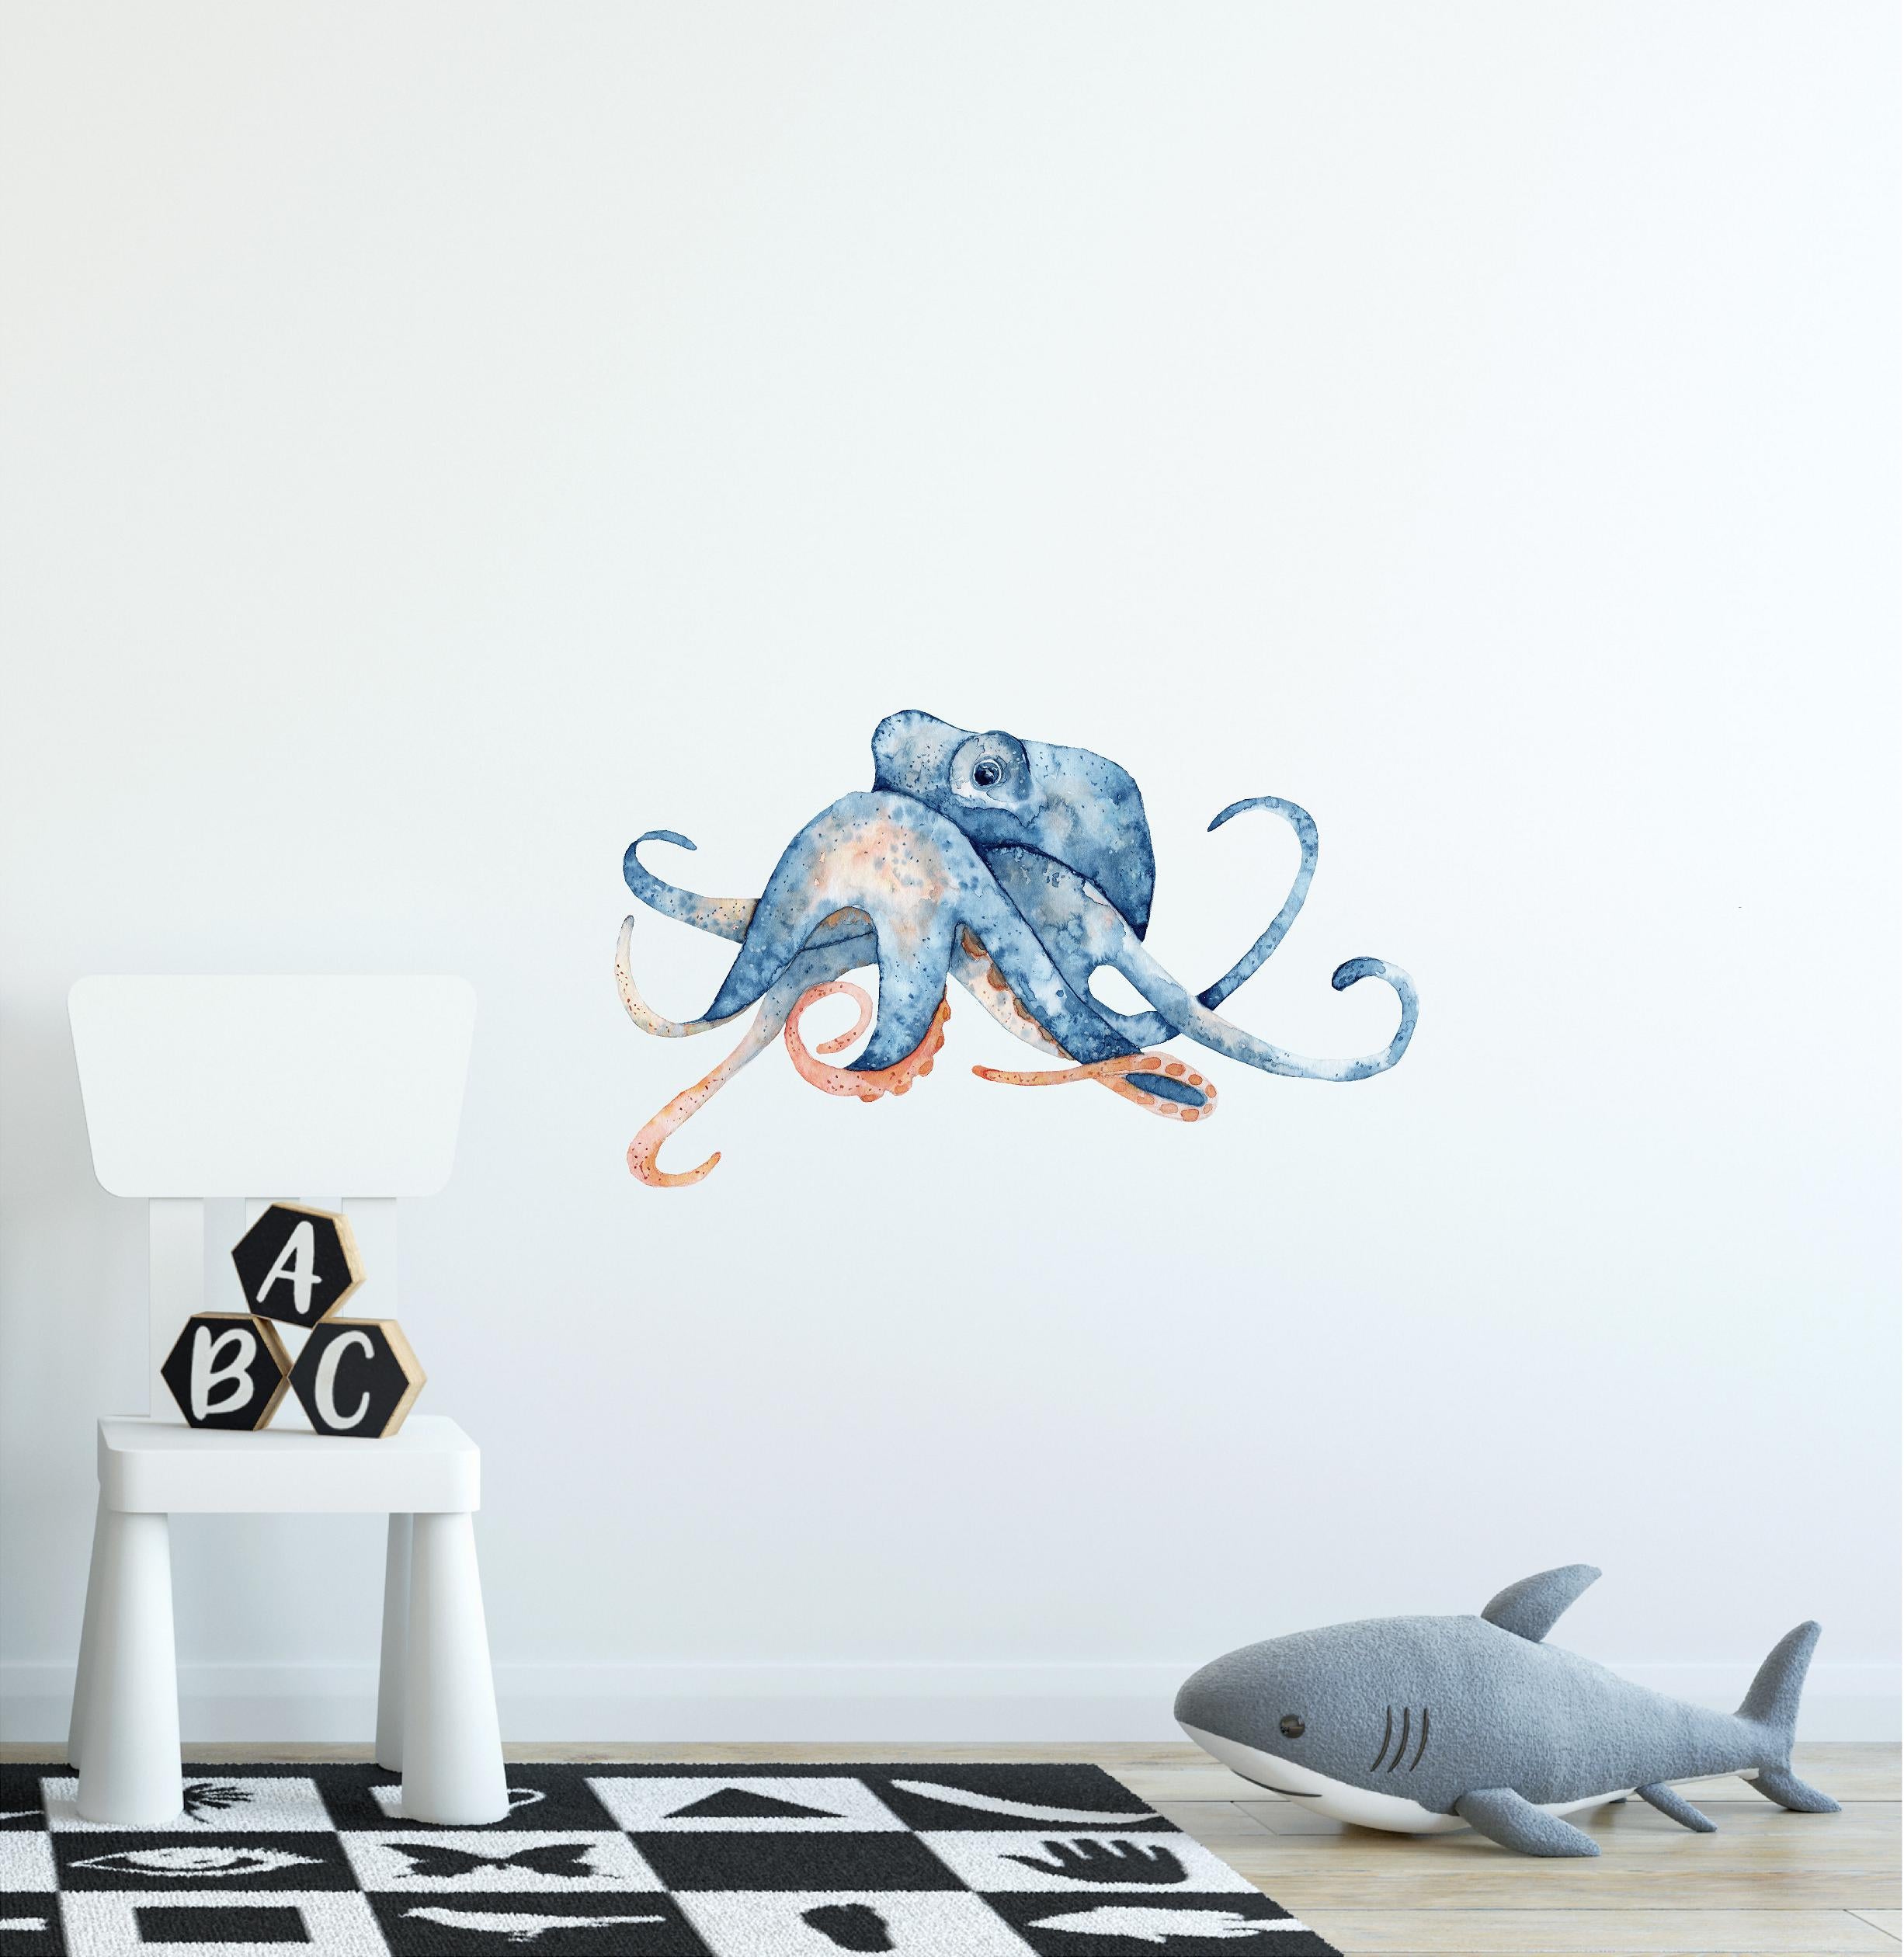 Octopus #6 Wall Decal Ocean Sea Life Removable Fabric Wall Sticker | DecalBaby